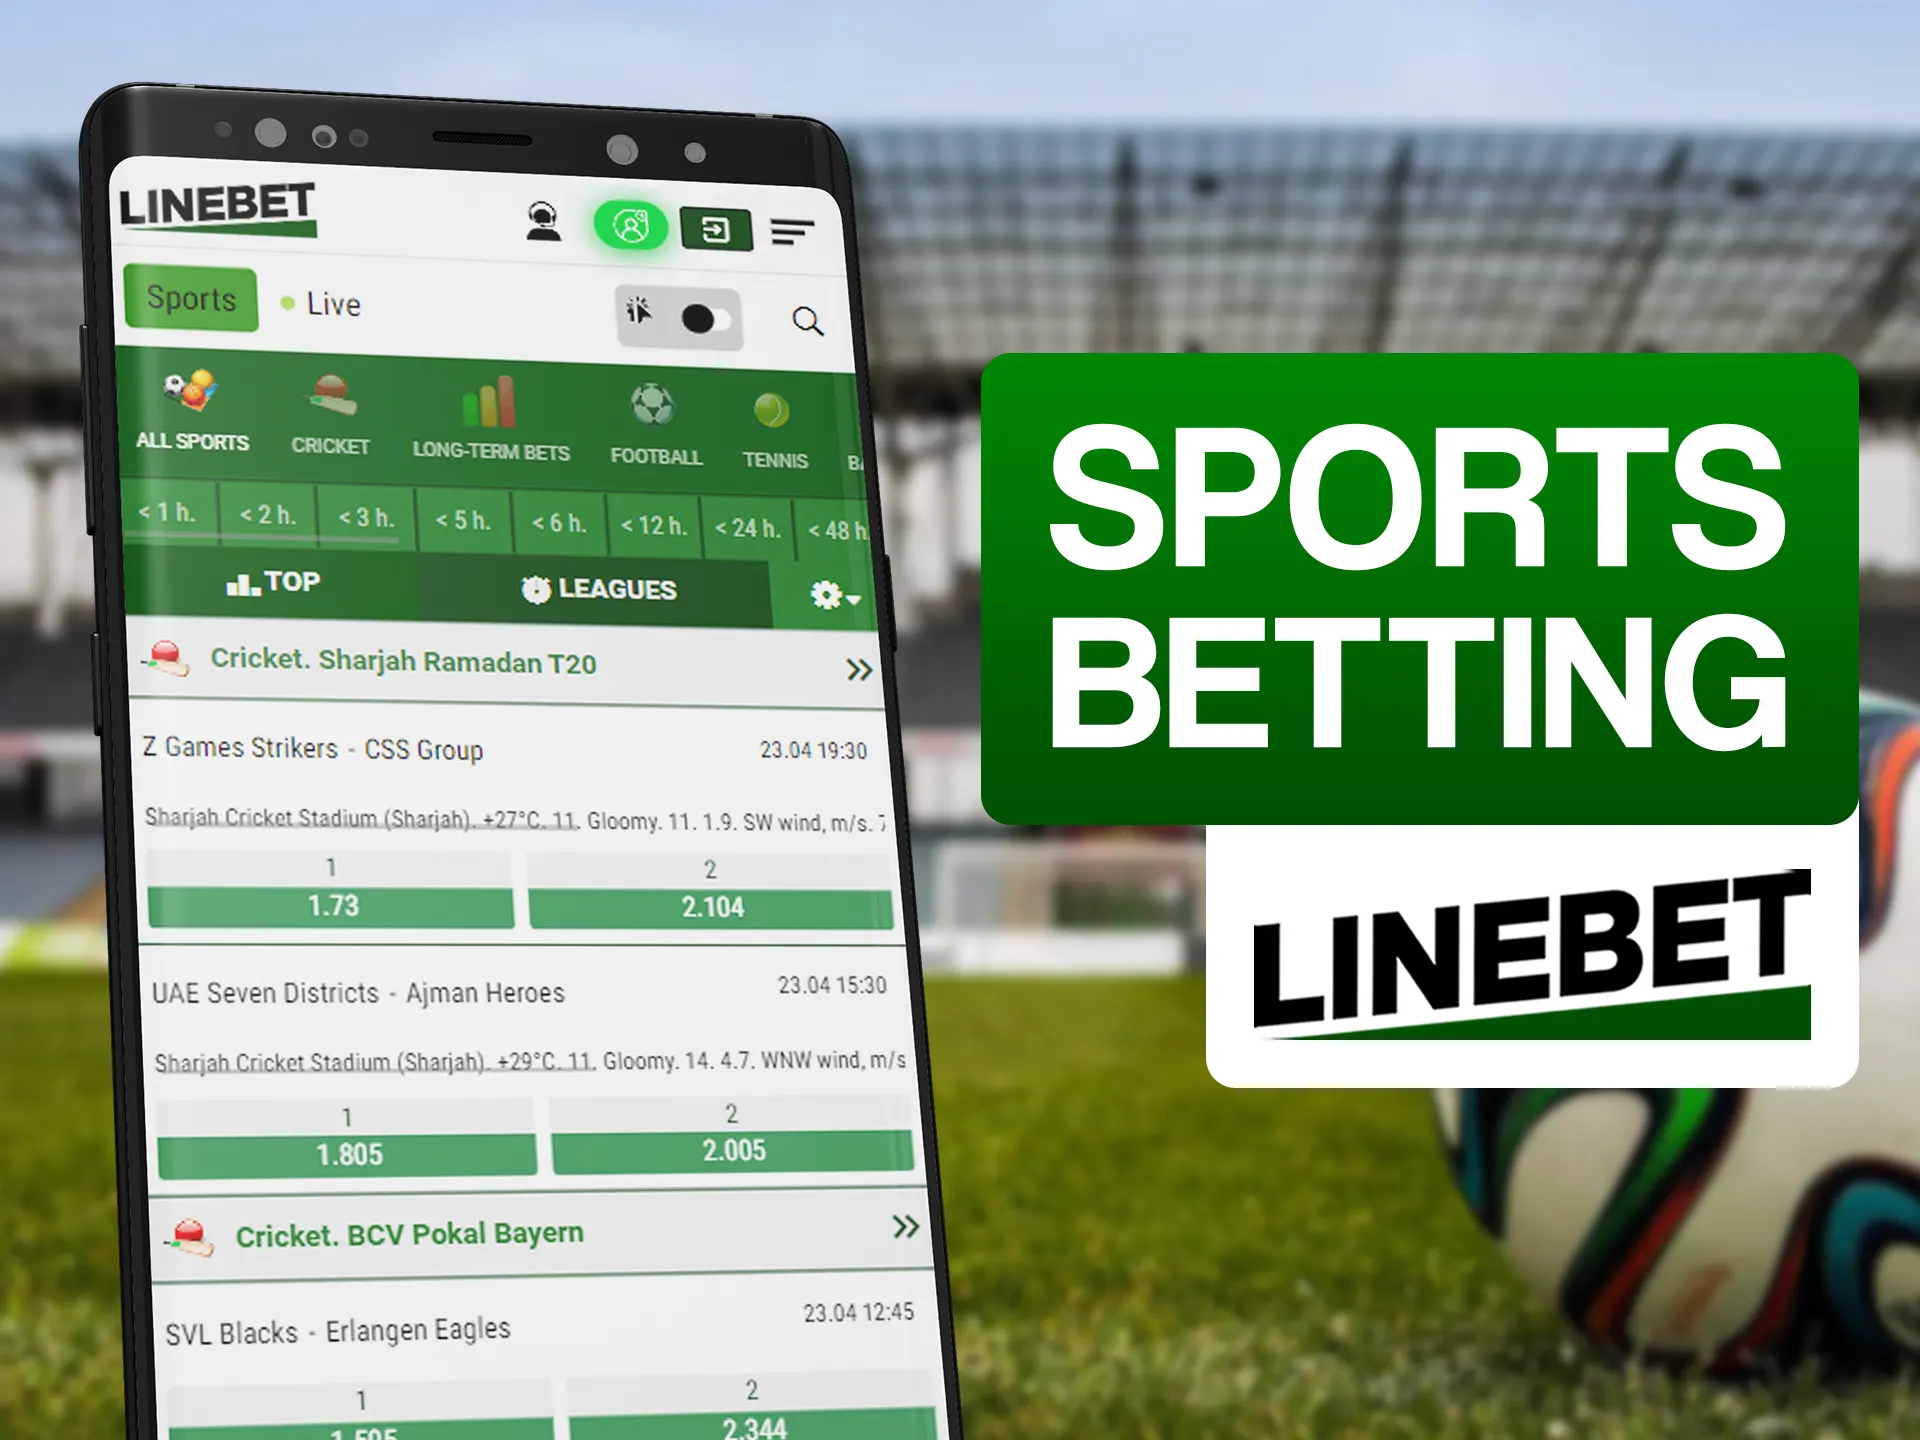 You can bet on various of sports using Linebet app.